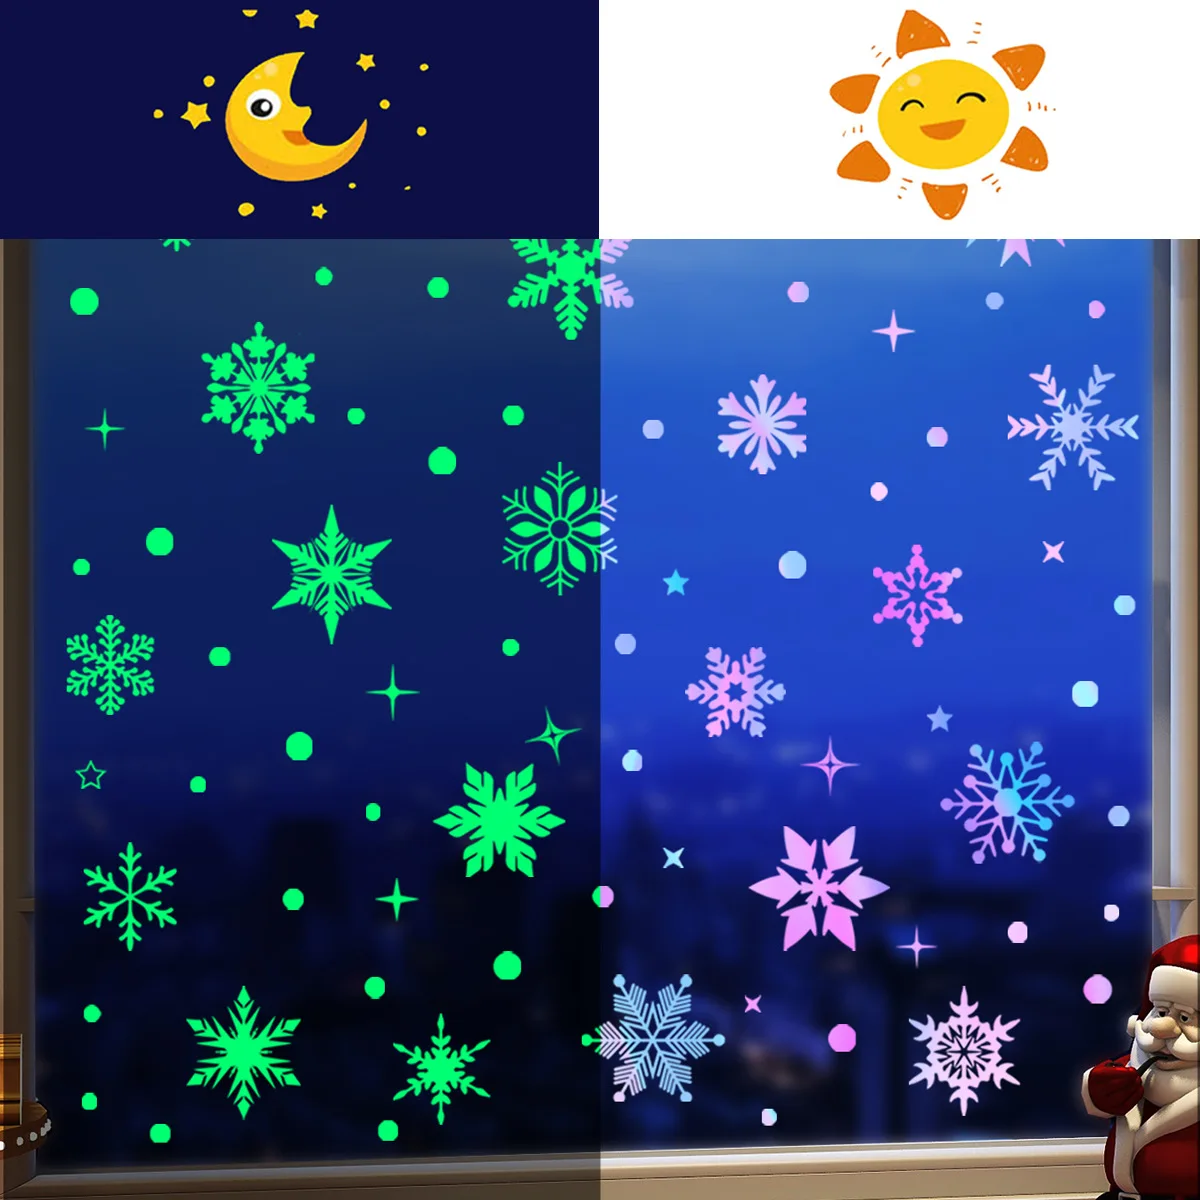 3pcs Colorful Luminous Snowflake Wall Stickers Glass Window Decorative Wall Stickers Christmas Wall Stickers Wallpapers Jdx8015 1 pcs 3pcs alumina emery strong sponge cleaning brush dish bowl washing sponge kitchen pot pan window glass cleaner tools